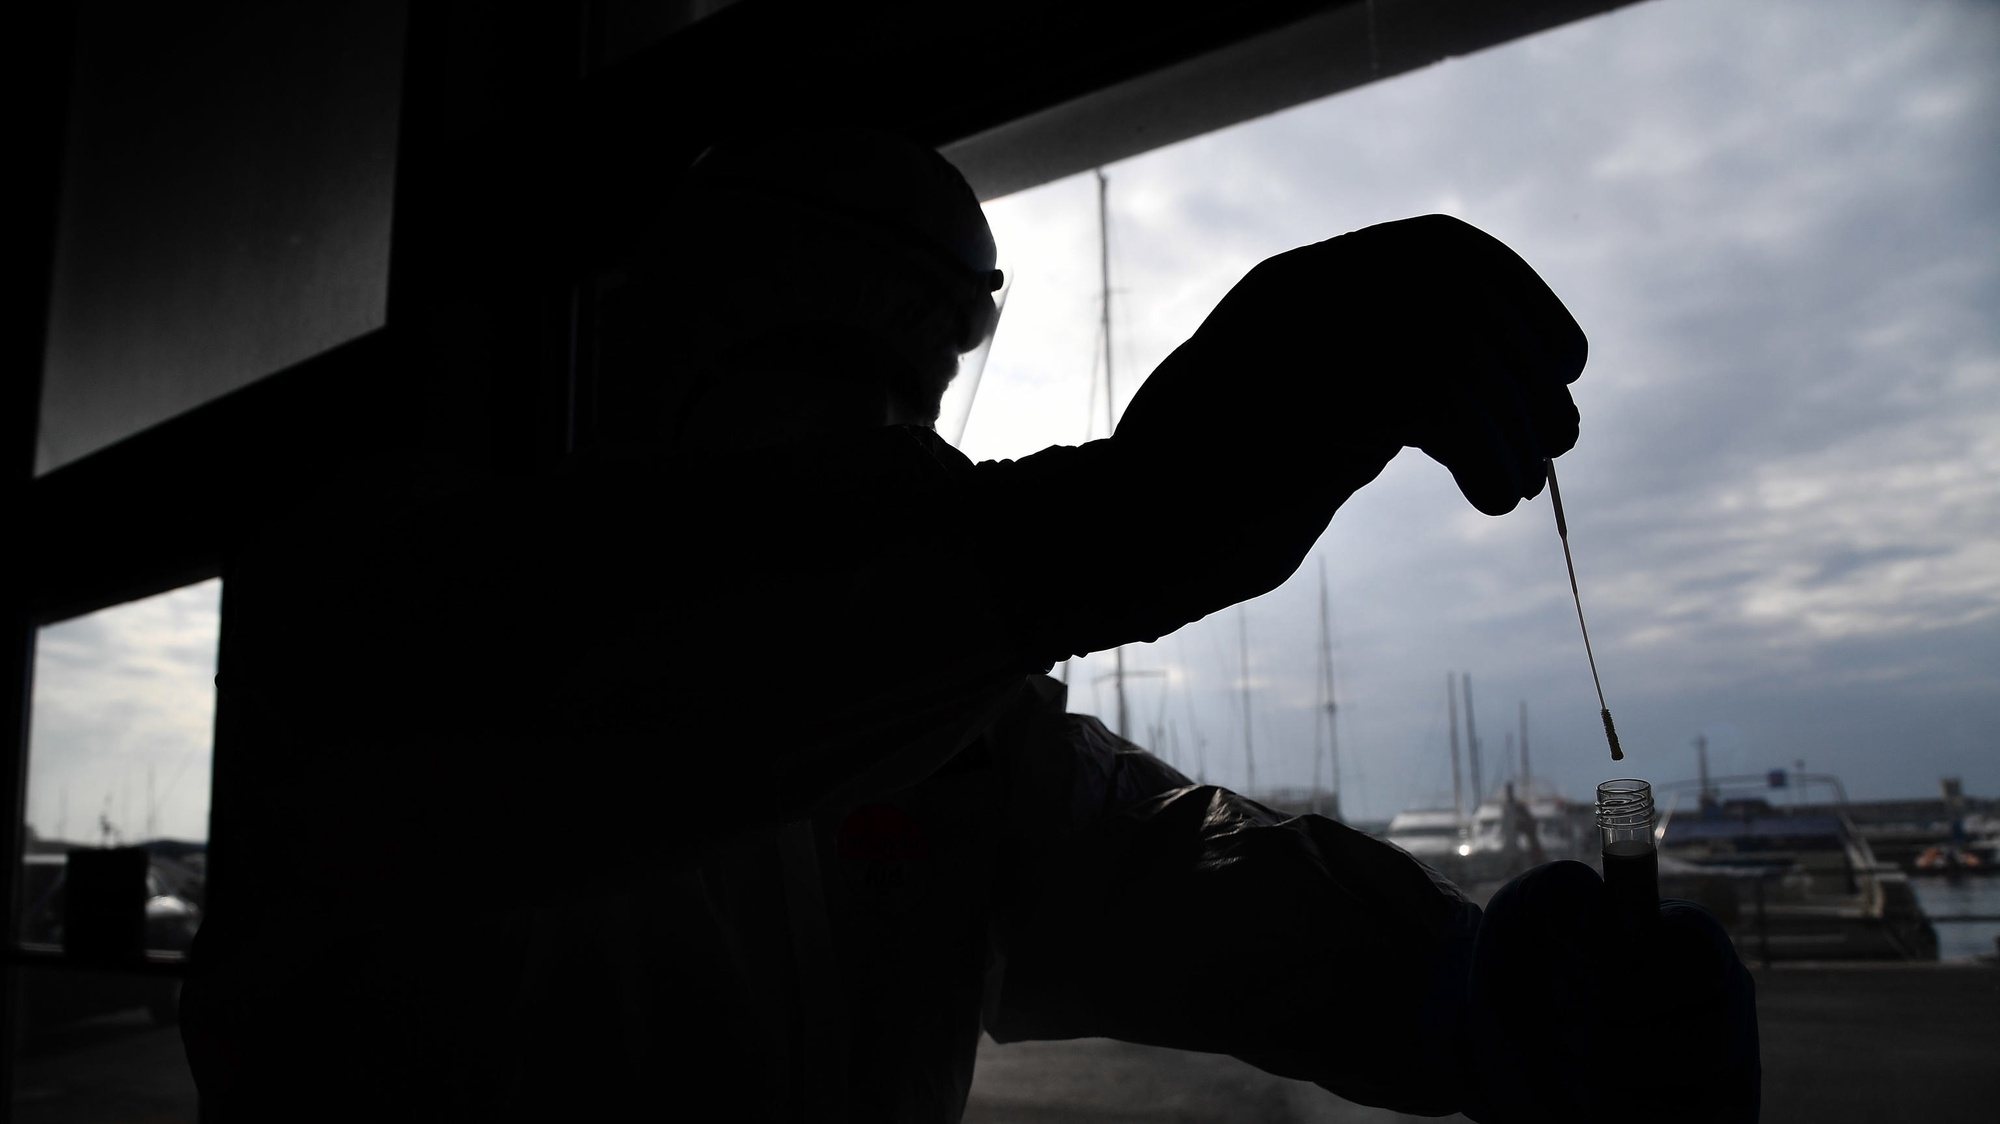 epa08818102 A health worker of the Navy Army collects a nose swab sample for a polymerase chain reaction (PCR) test at the Genoa Fair drive through coronavirus testing facility during the coronavirus disease COVID-19 outbreak, in Genoa, Italy, 13 November 2020.  EPA/LUCA ZENNARO